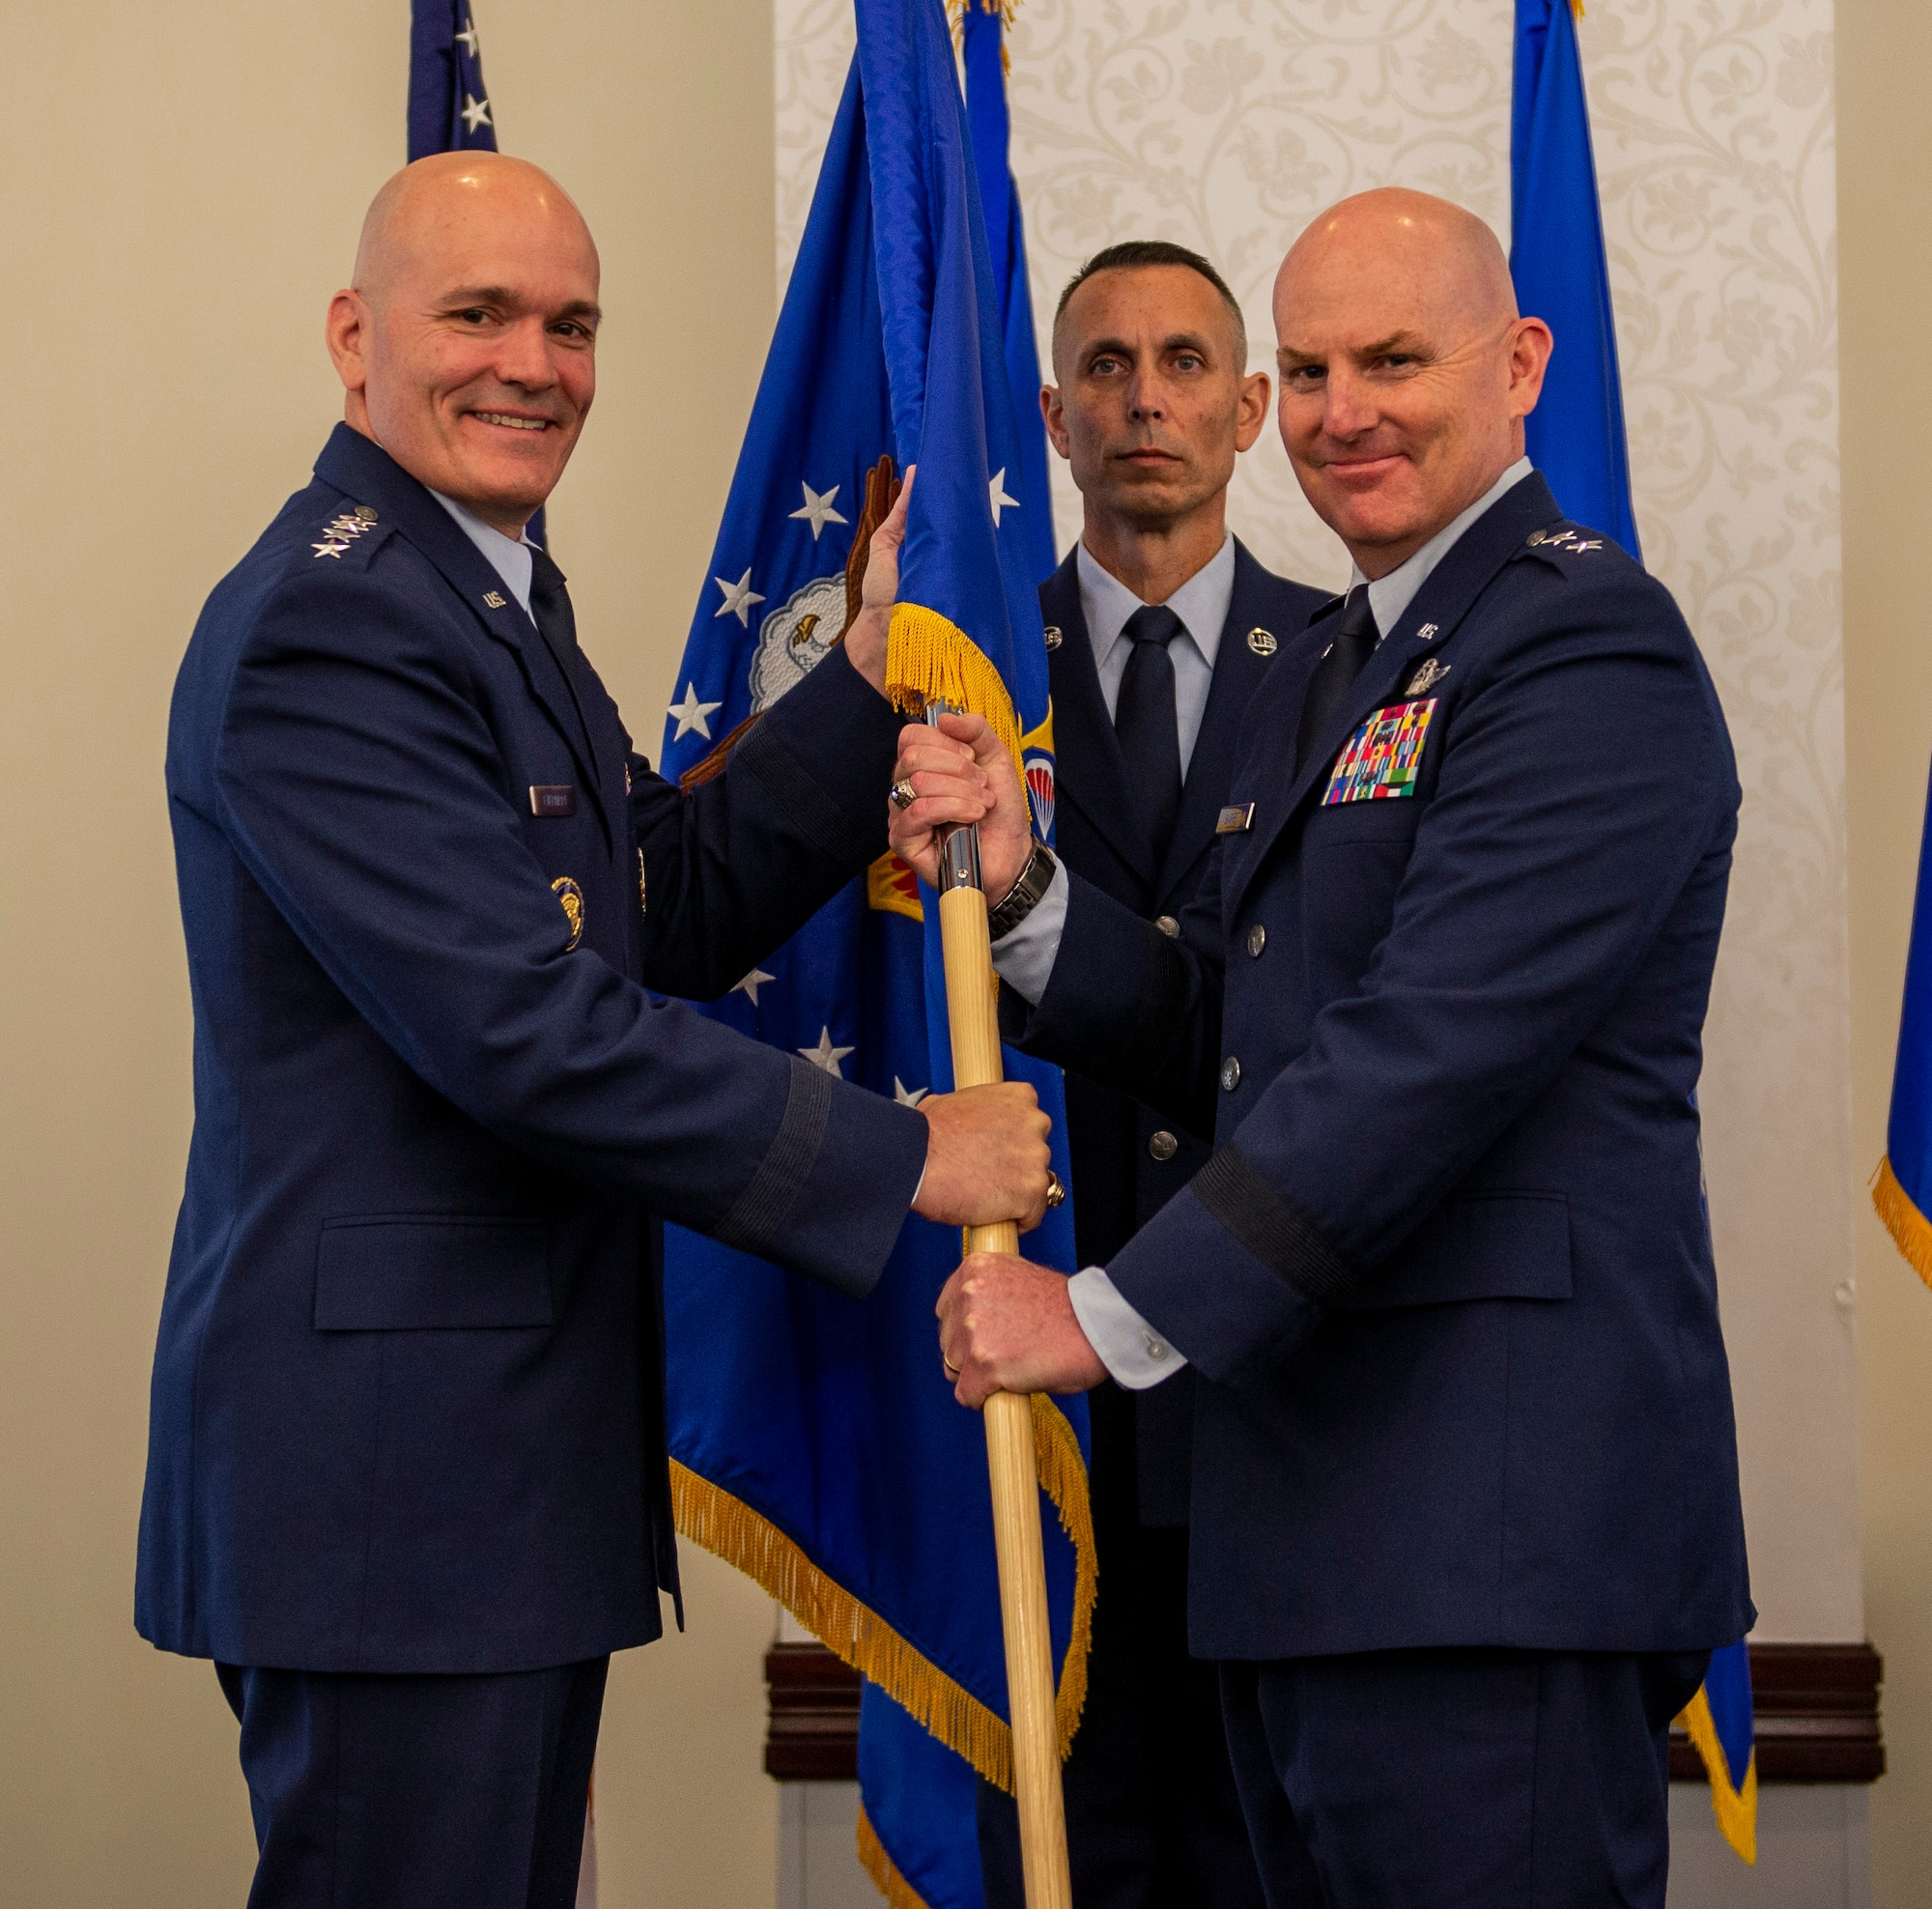 Maj. Gen. Sam Barrett takes the 18th Air Force guidon from Gen. Carlton Everhart, and assumes command of 18th AF during a ceremony July 31, at Scott Air Force Base, Ill. Barrett comes to 18 AF from his position as the Director of operations, Strategic Deterrence and Nuclear Integration, Headquarters Air Mobility Command, Scott AFB. (U.S. Air Force photo by Airman 1st Class Chad Gorecki)